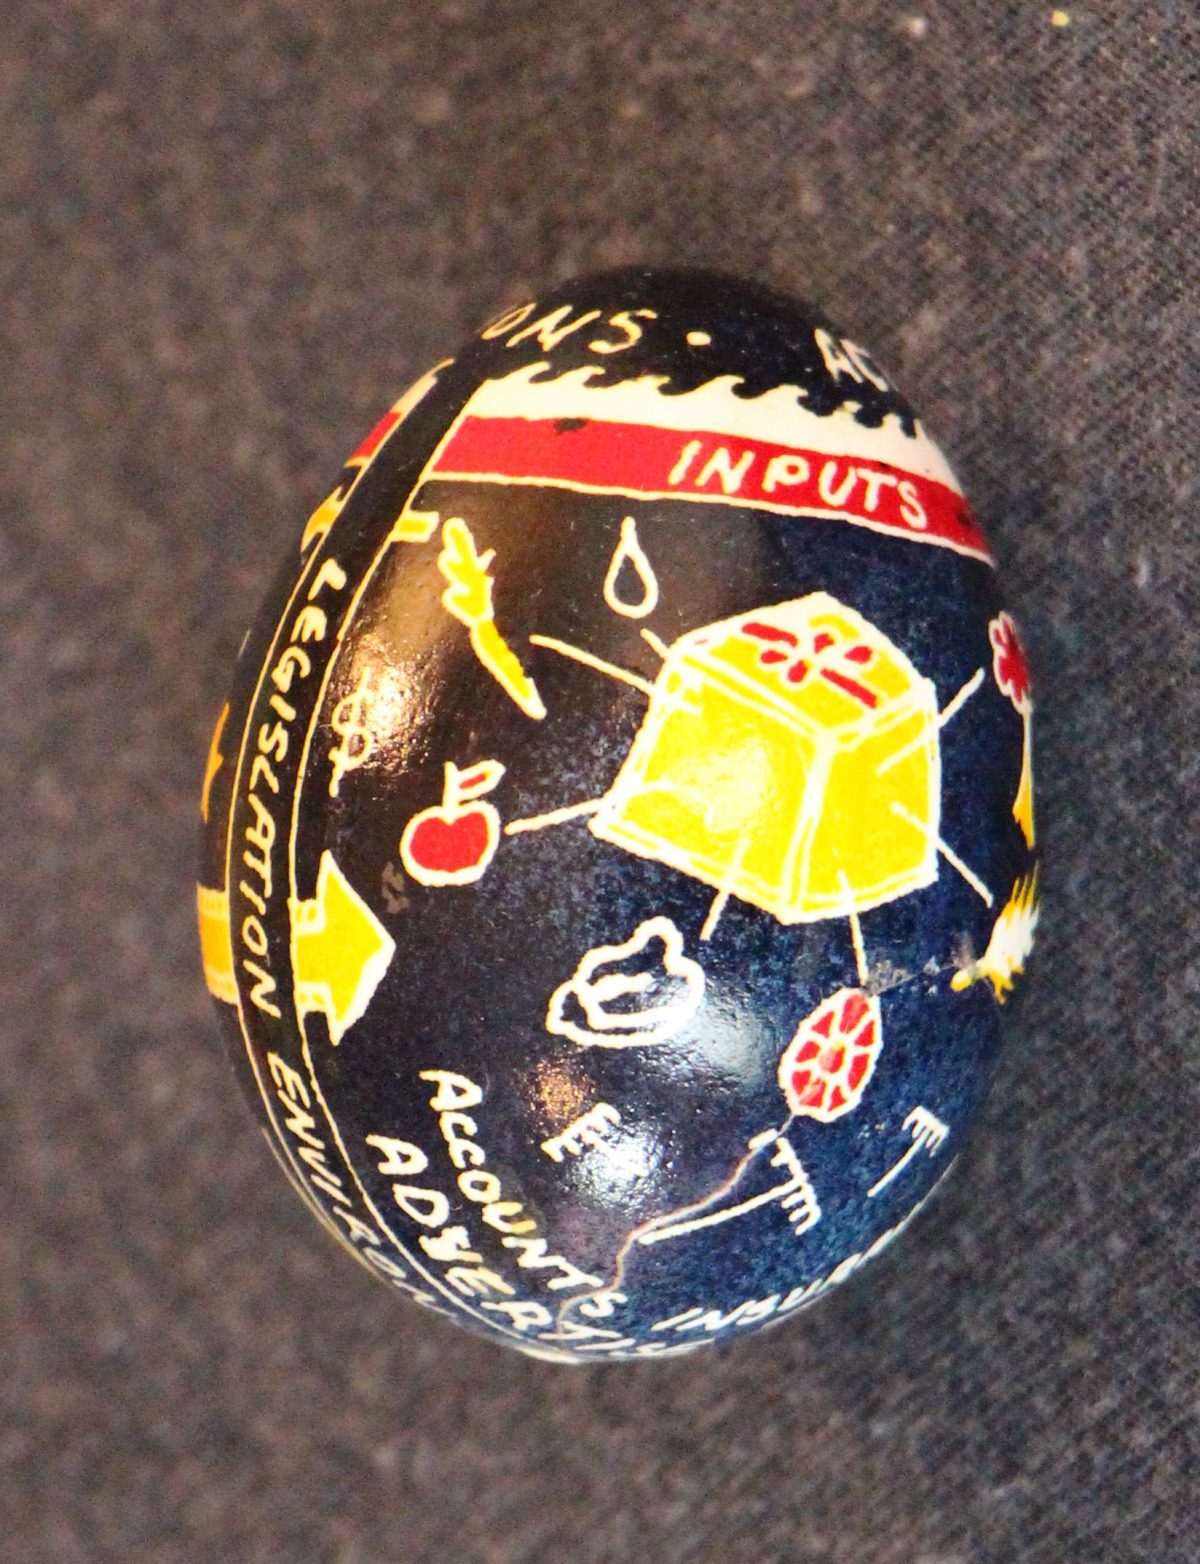 Pysanky Eggs (Take Back the Economy) – by LHASA